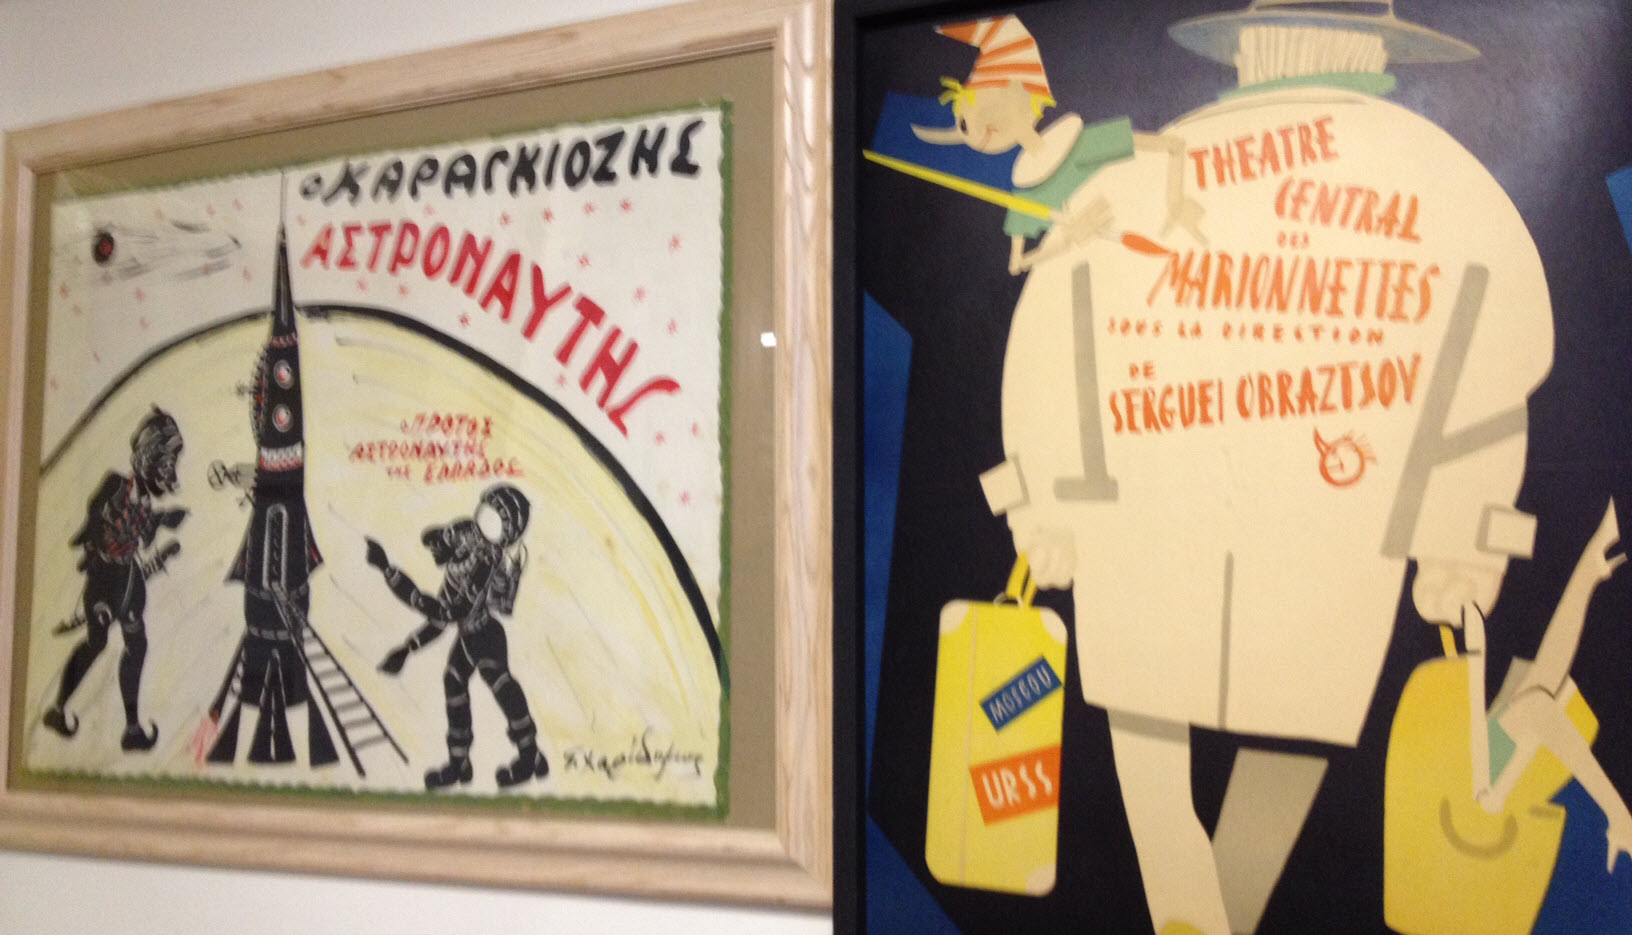 Historic posters of European puppet theater productions. Credit: Bryony Angell